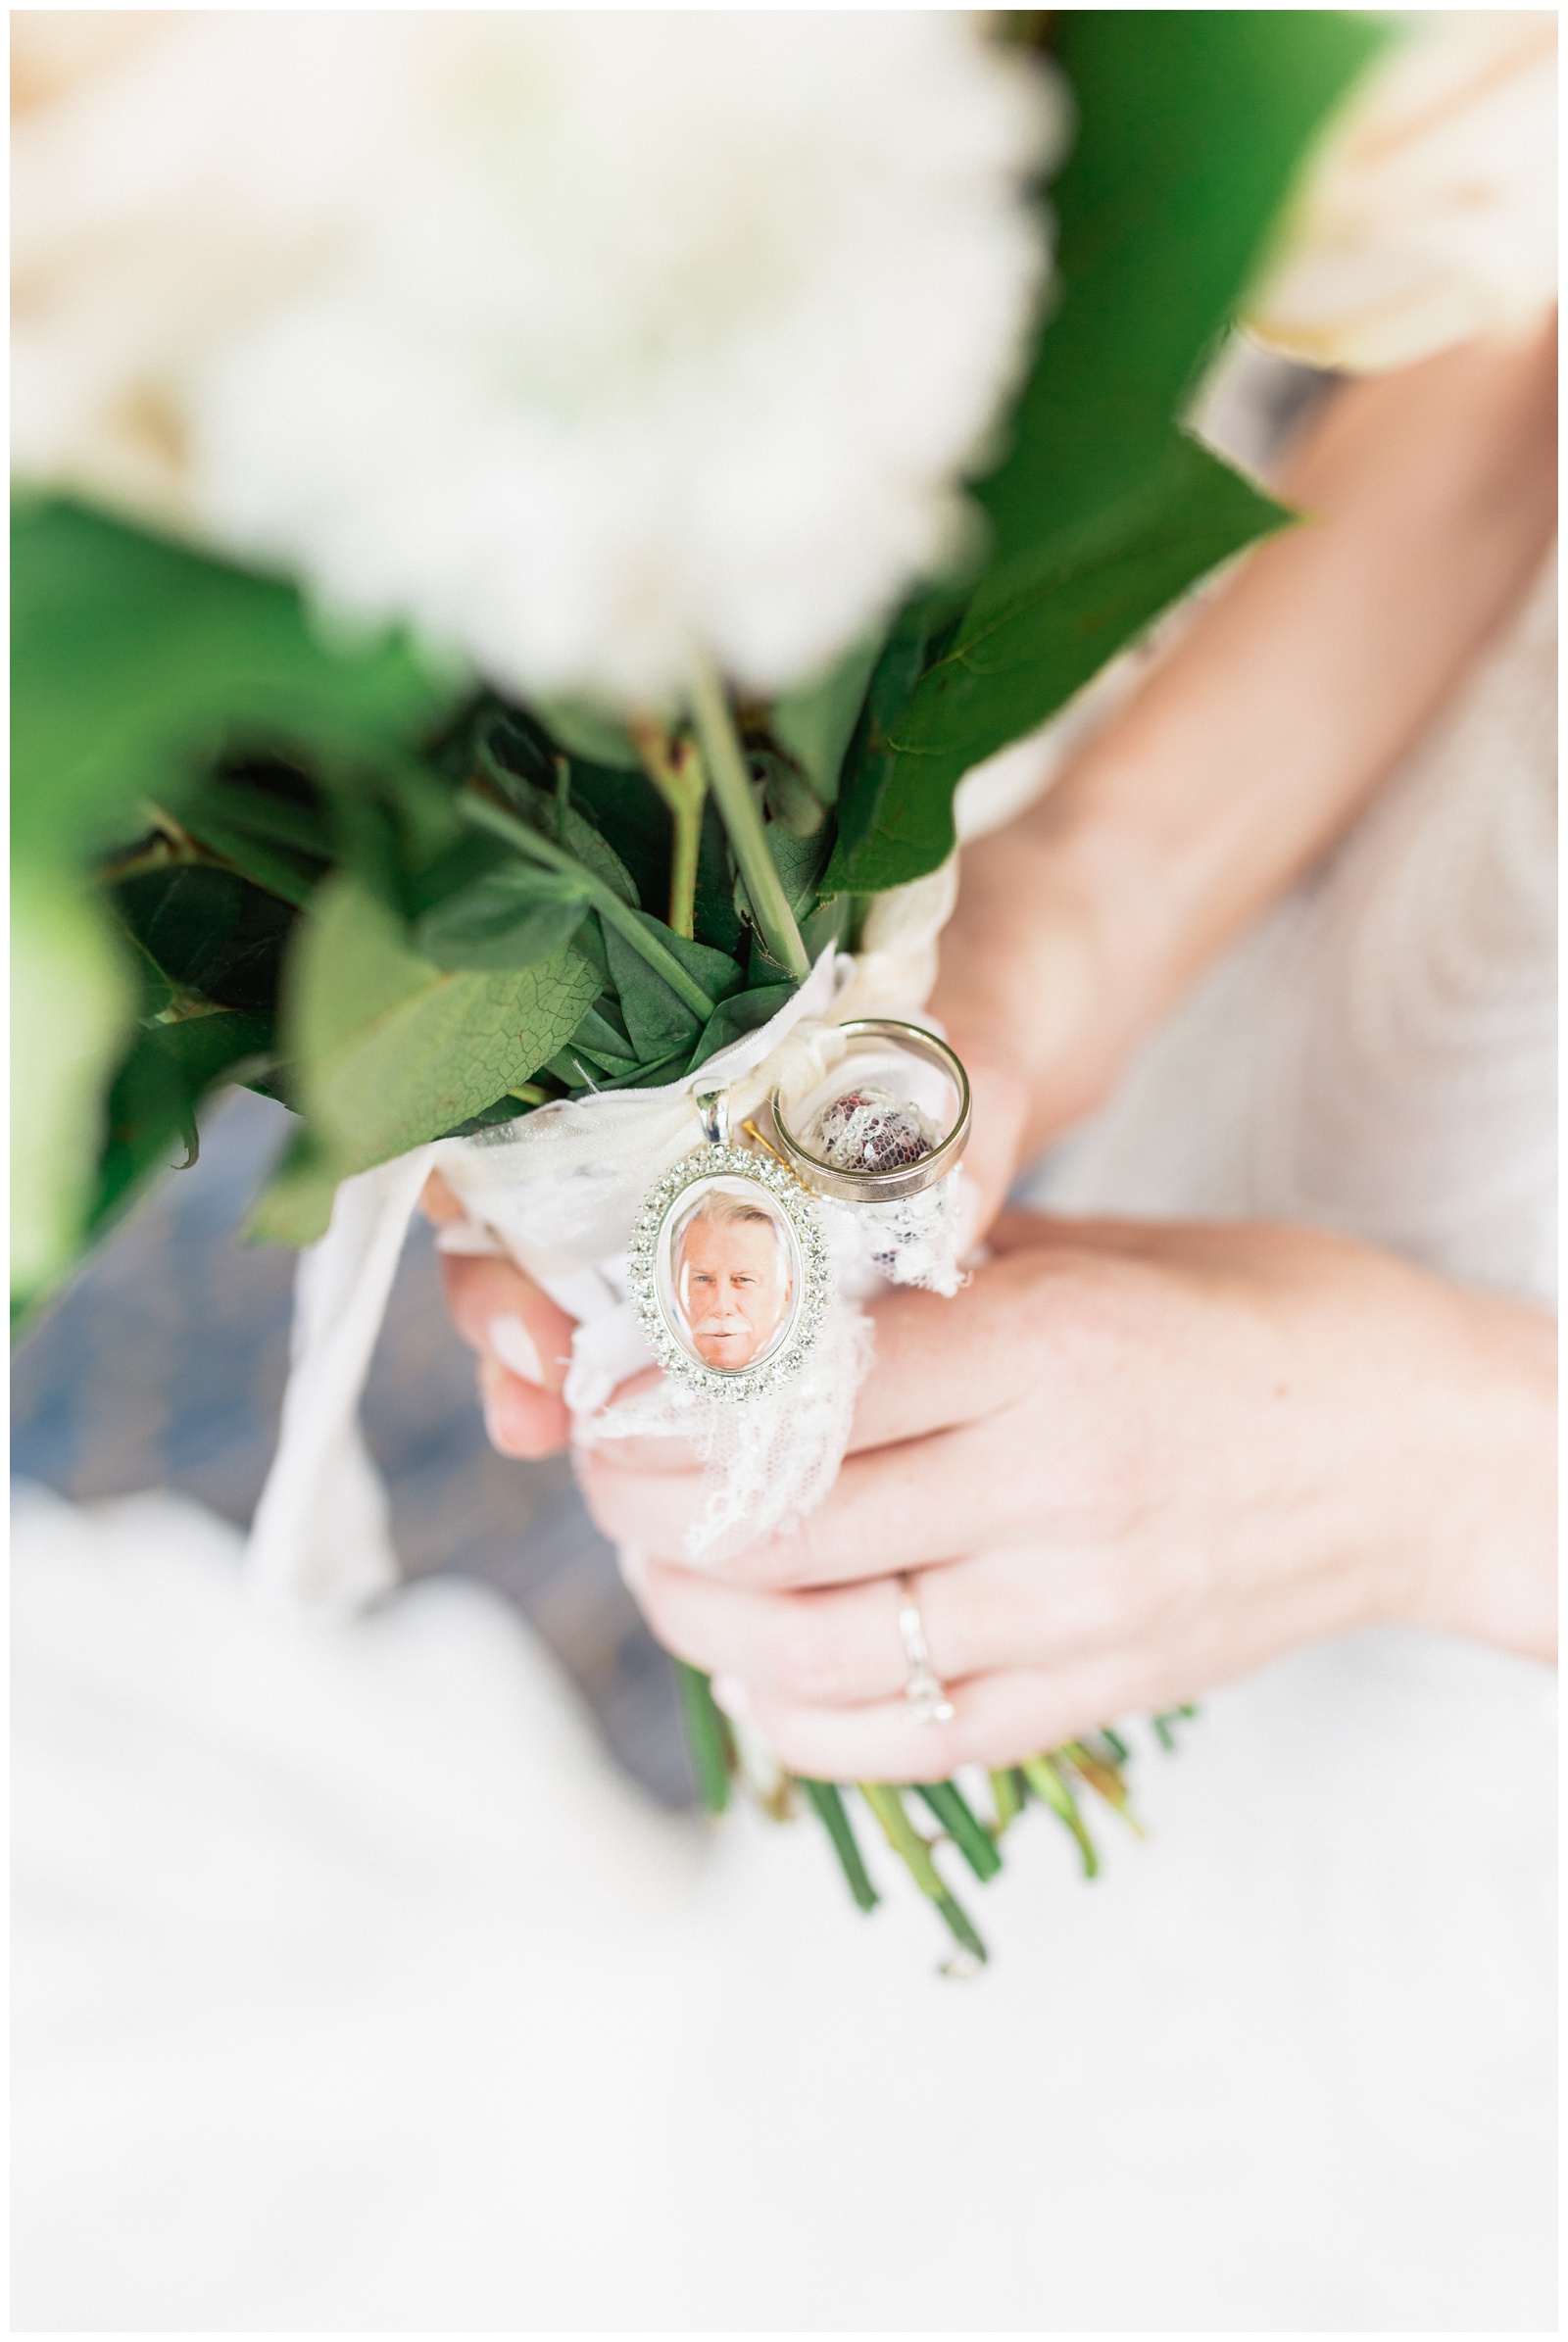 Bride's bouquet details | Matlock and Kelly Photography